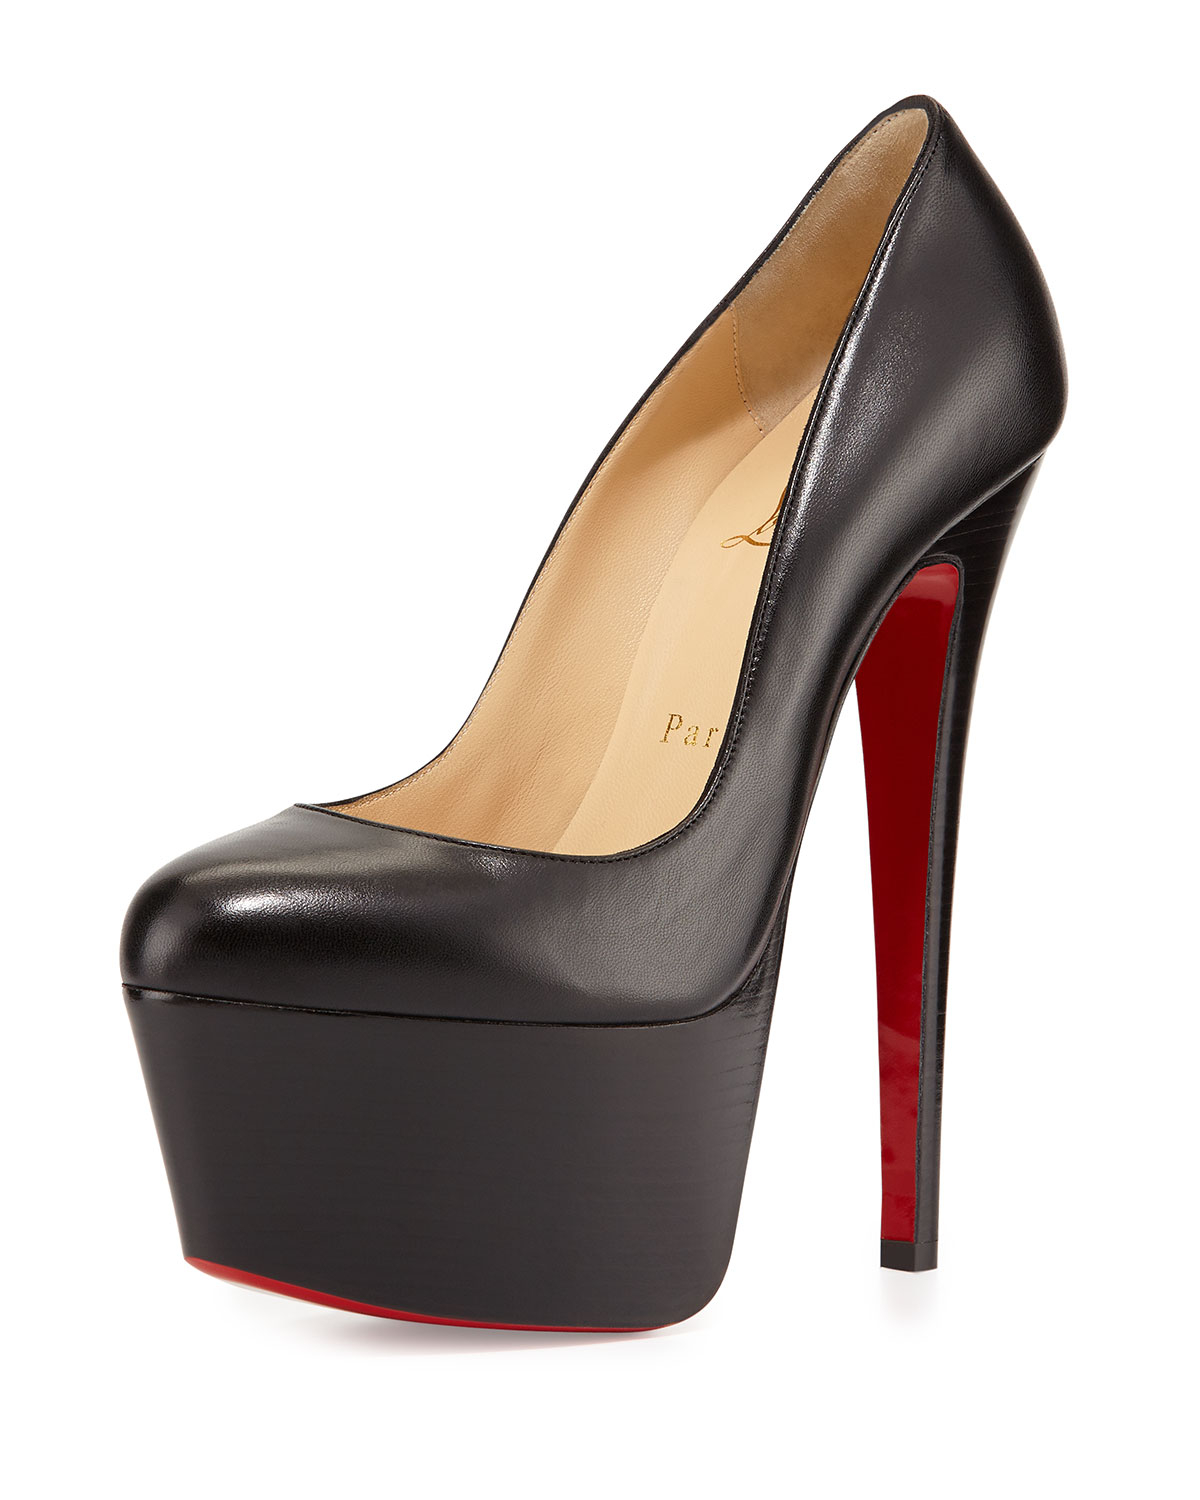 Lyst - Christian Louboutin Victoria Leather Platform Red Sole Pump in Black